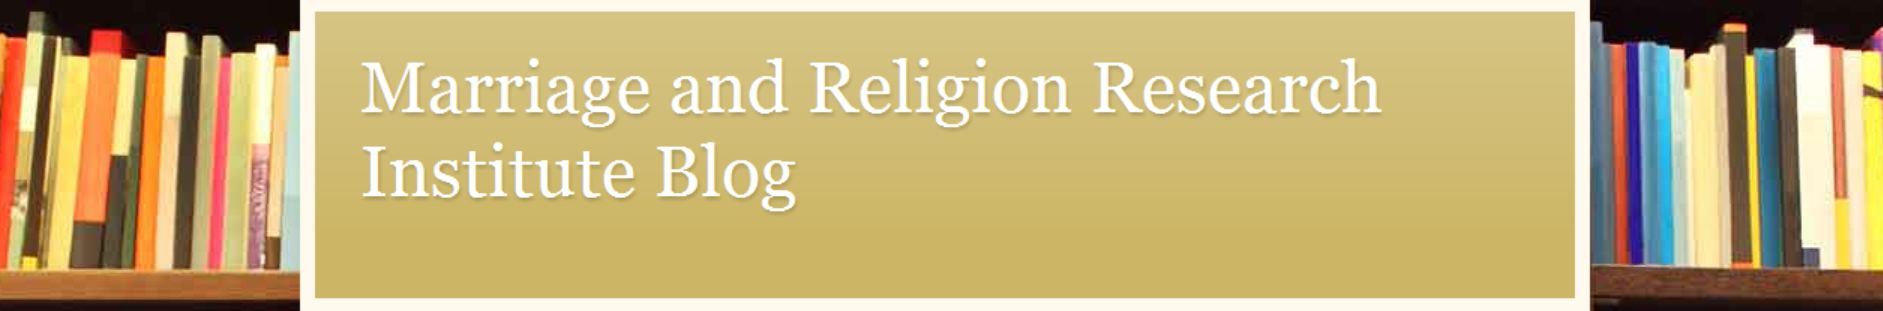 marriage and religion research institute